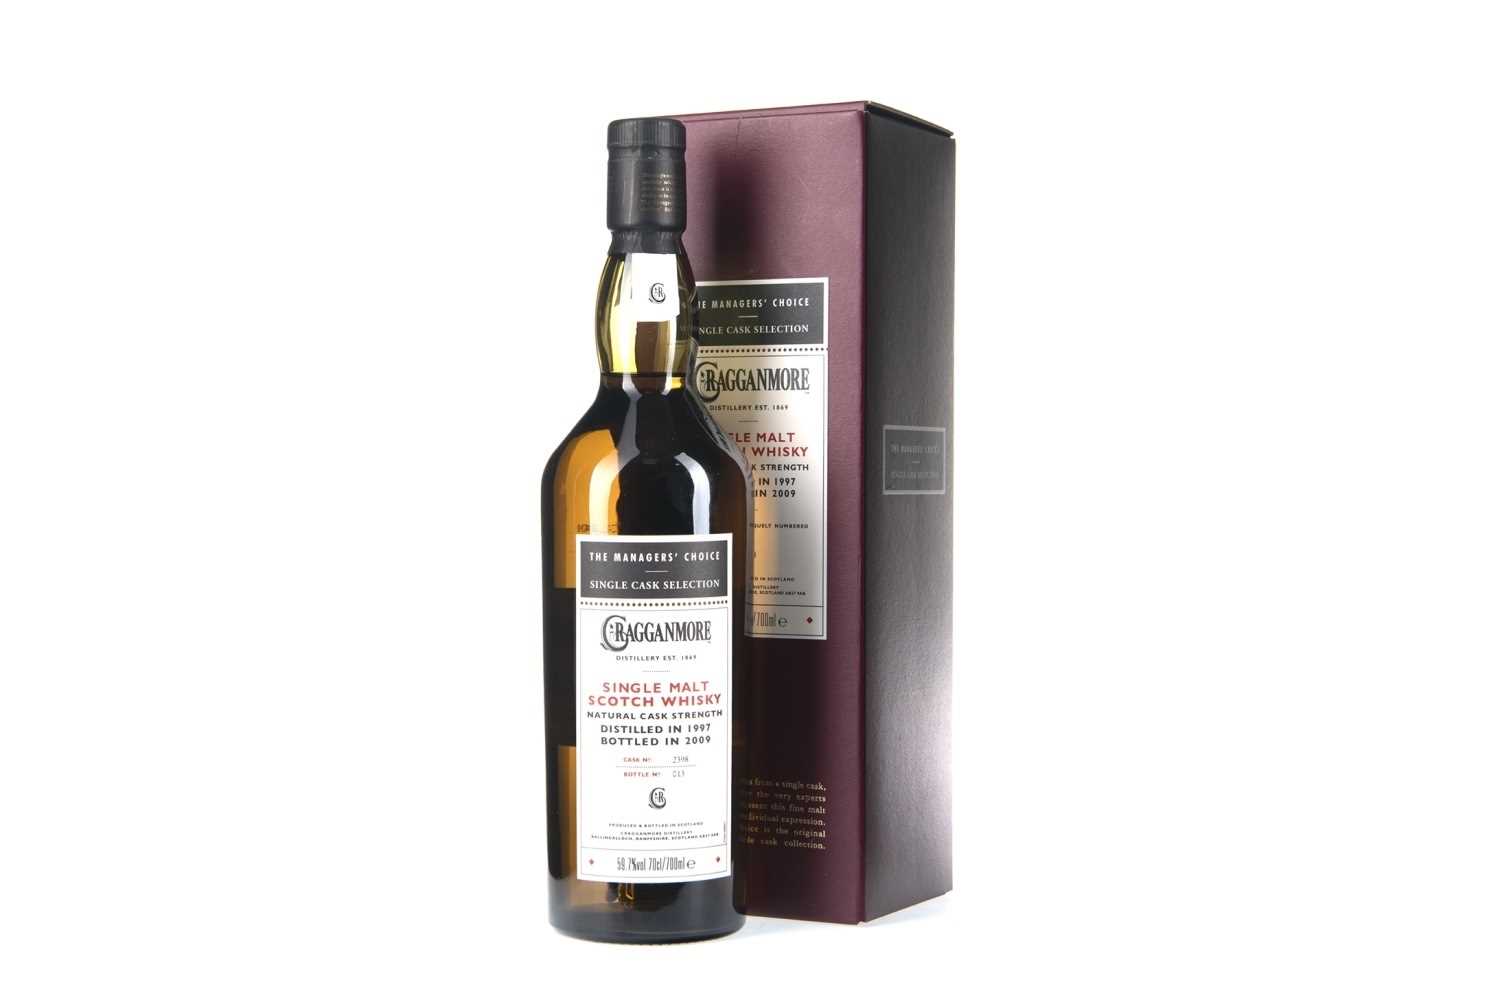 Lot 298 - CRAGGANMORE 1997 MANAGERS' CHOICE